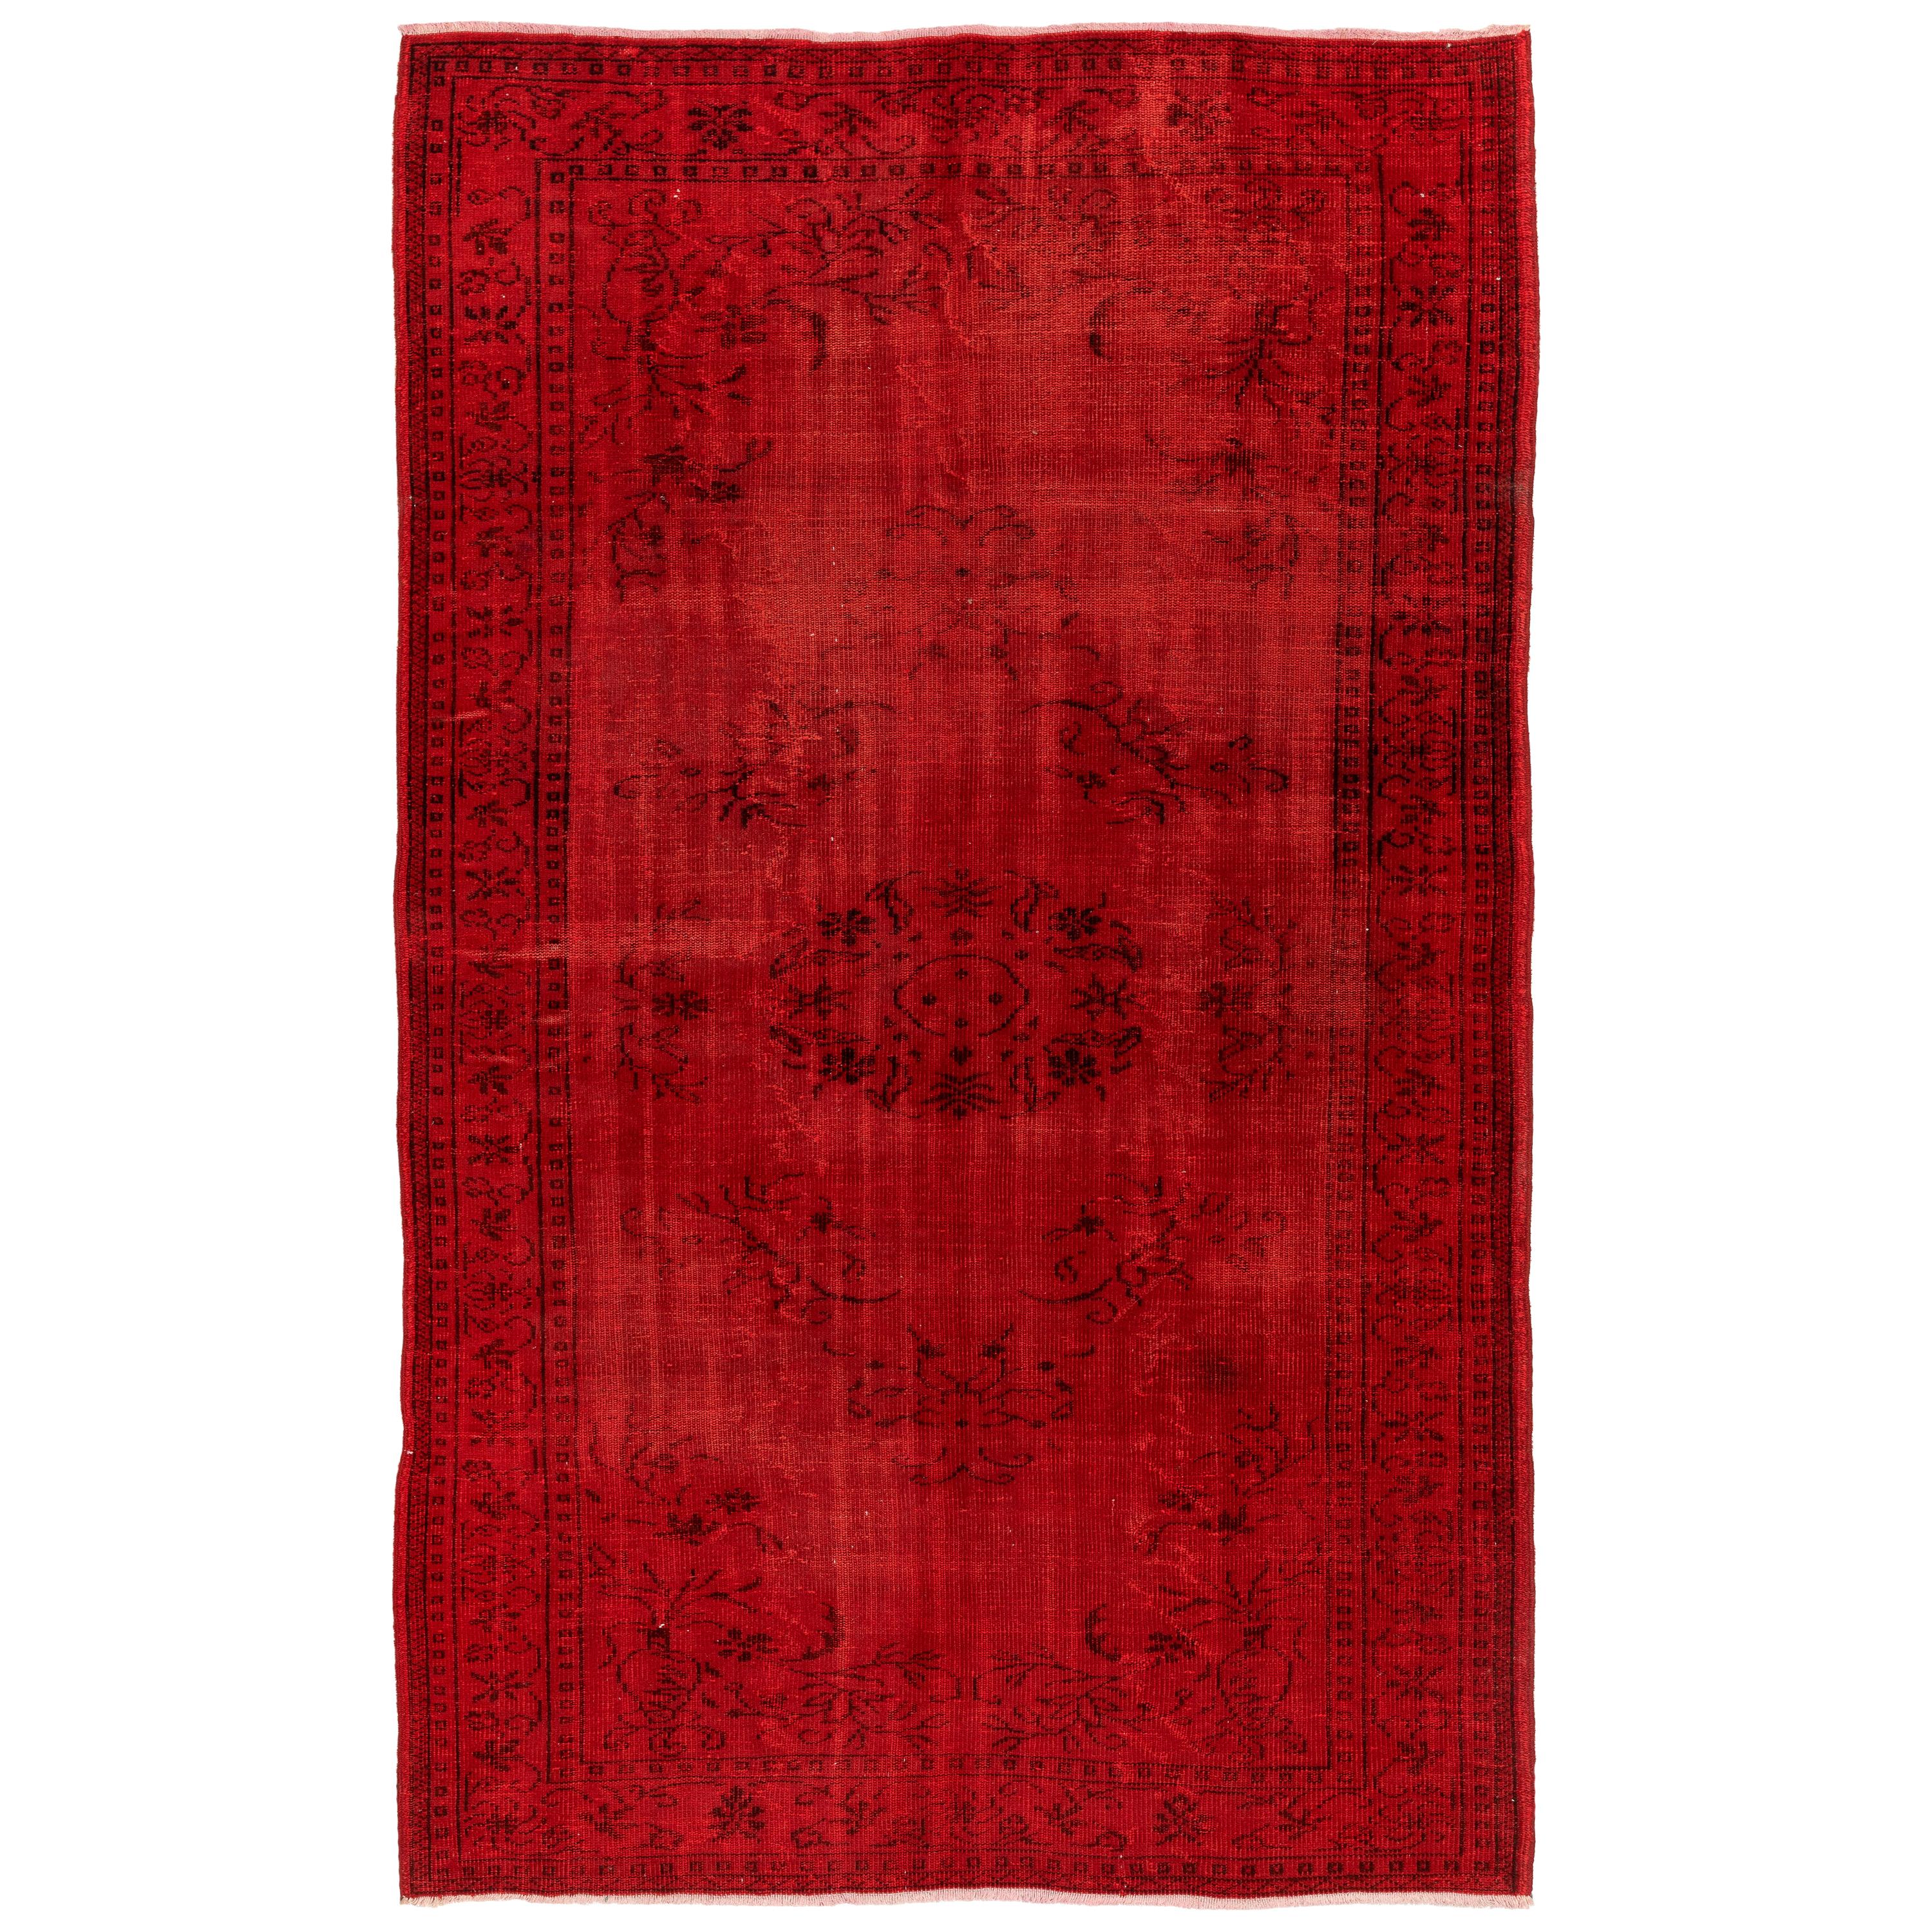 5.8 x 8.8 Ft Vintage Rug Overdyed in Red. Great for Modern Home & Office Decor